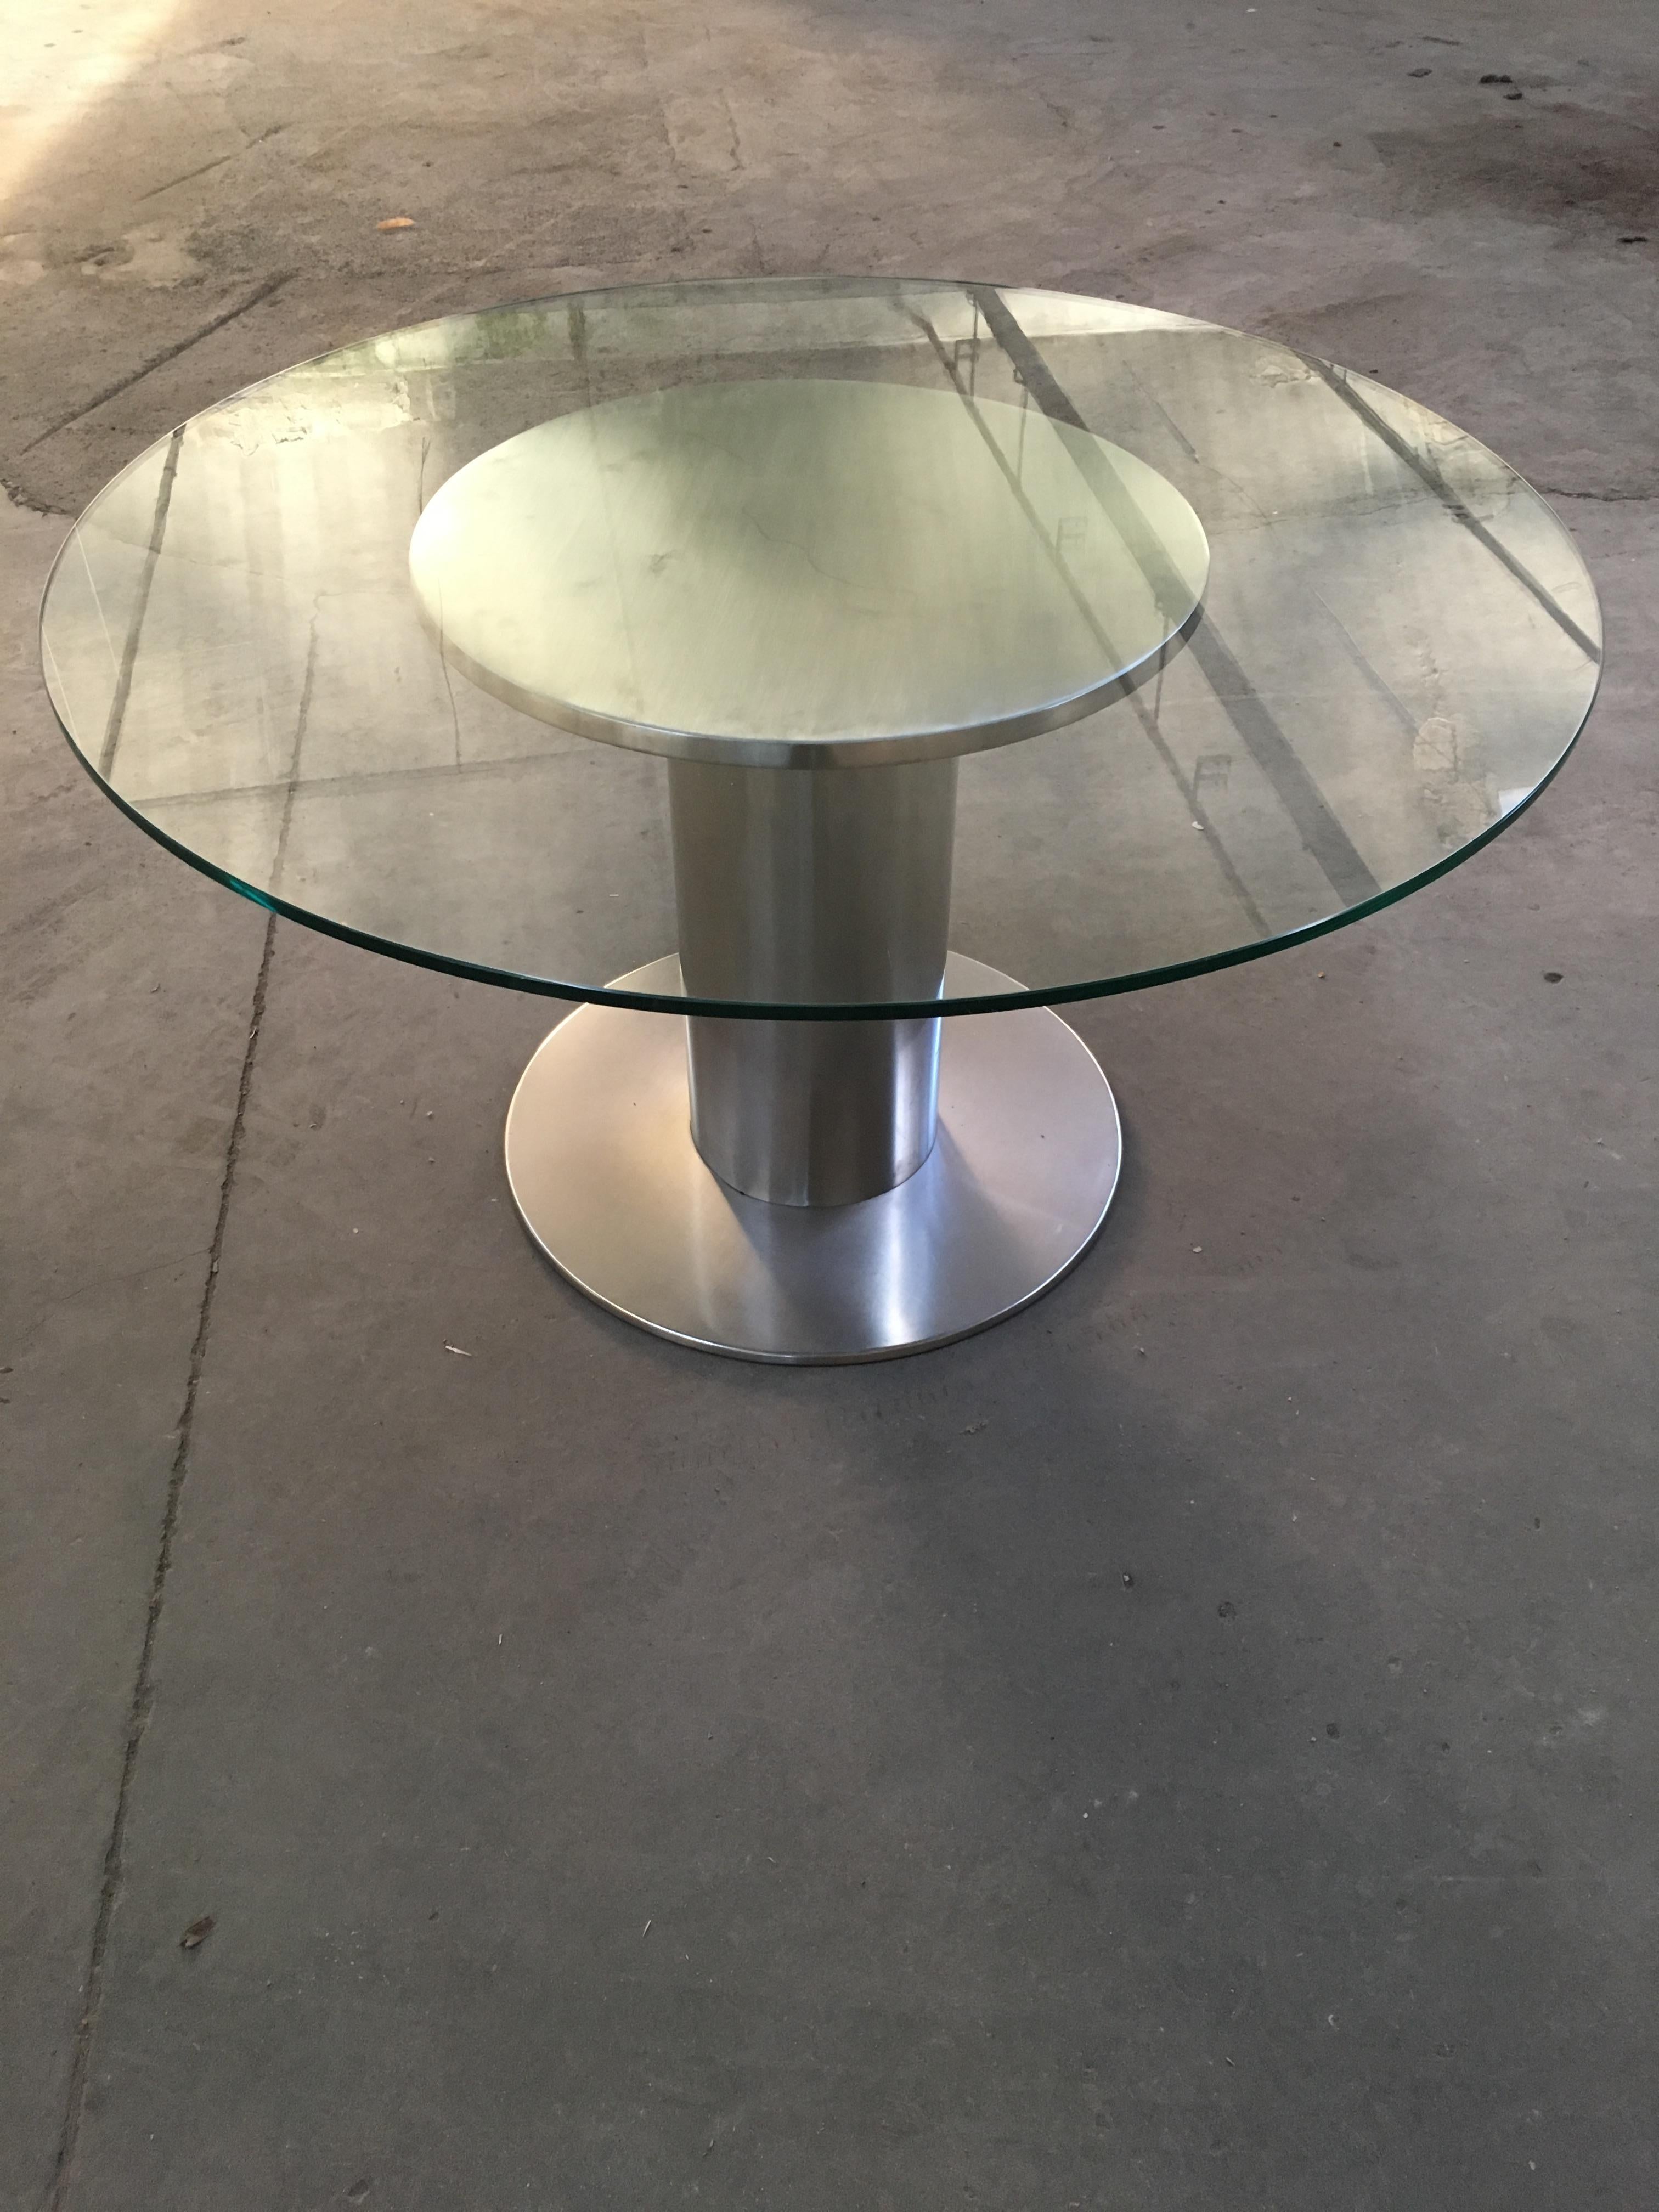 Tempered Mid-Century Modern Italian Chrome Dining Table with Glass Top, 1970s